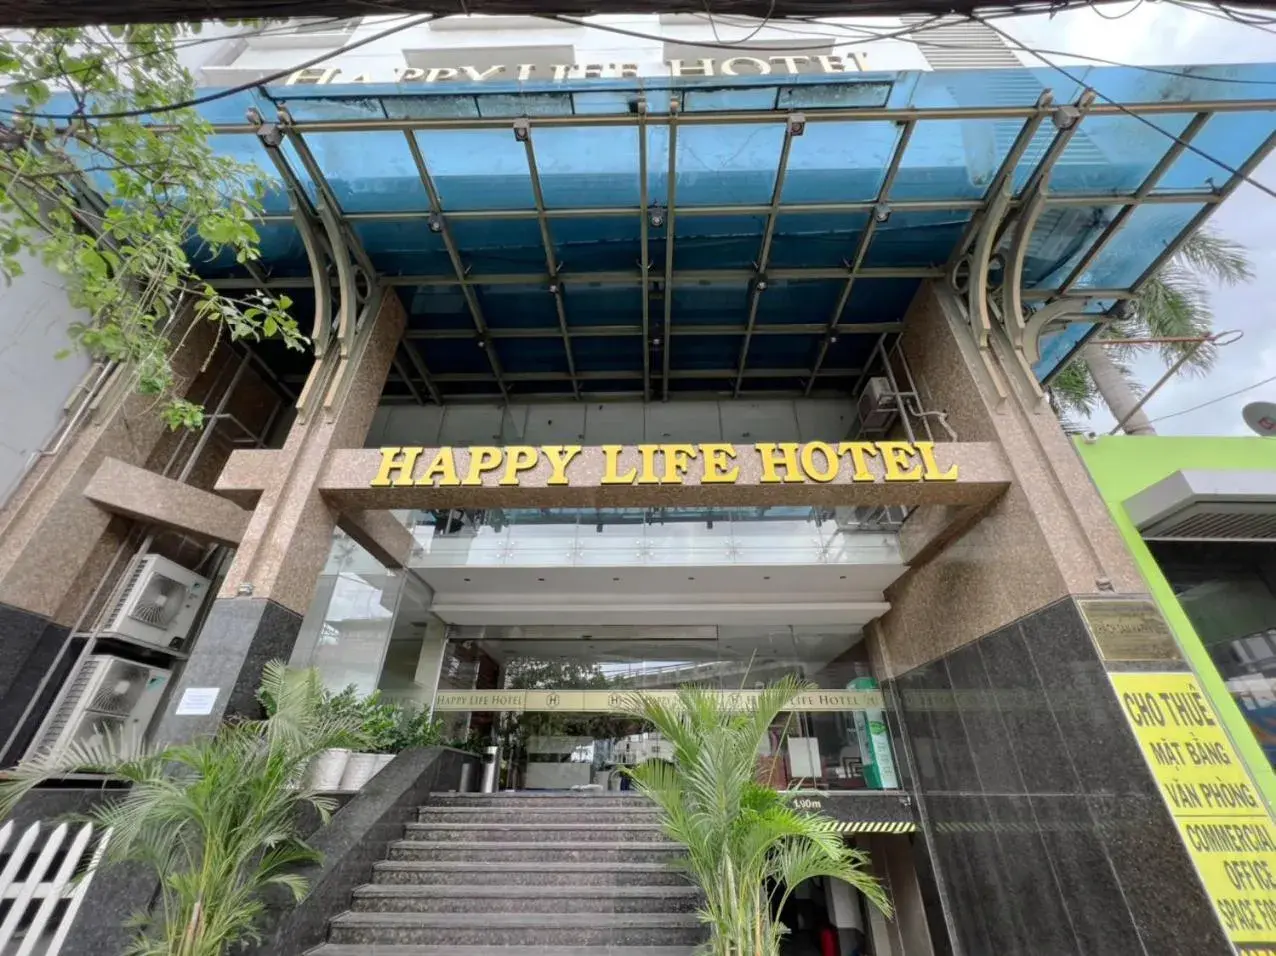 Property logo or sign in Happy Life Hotel